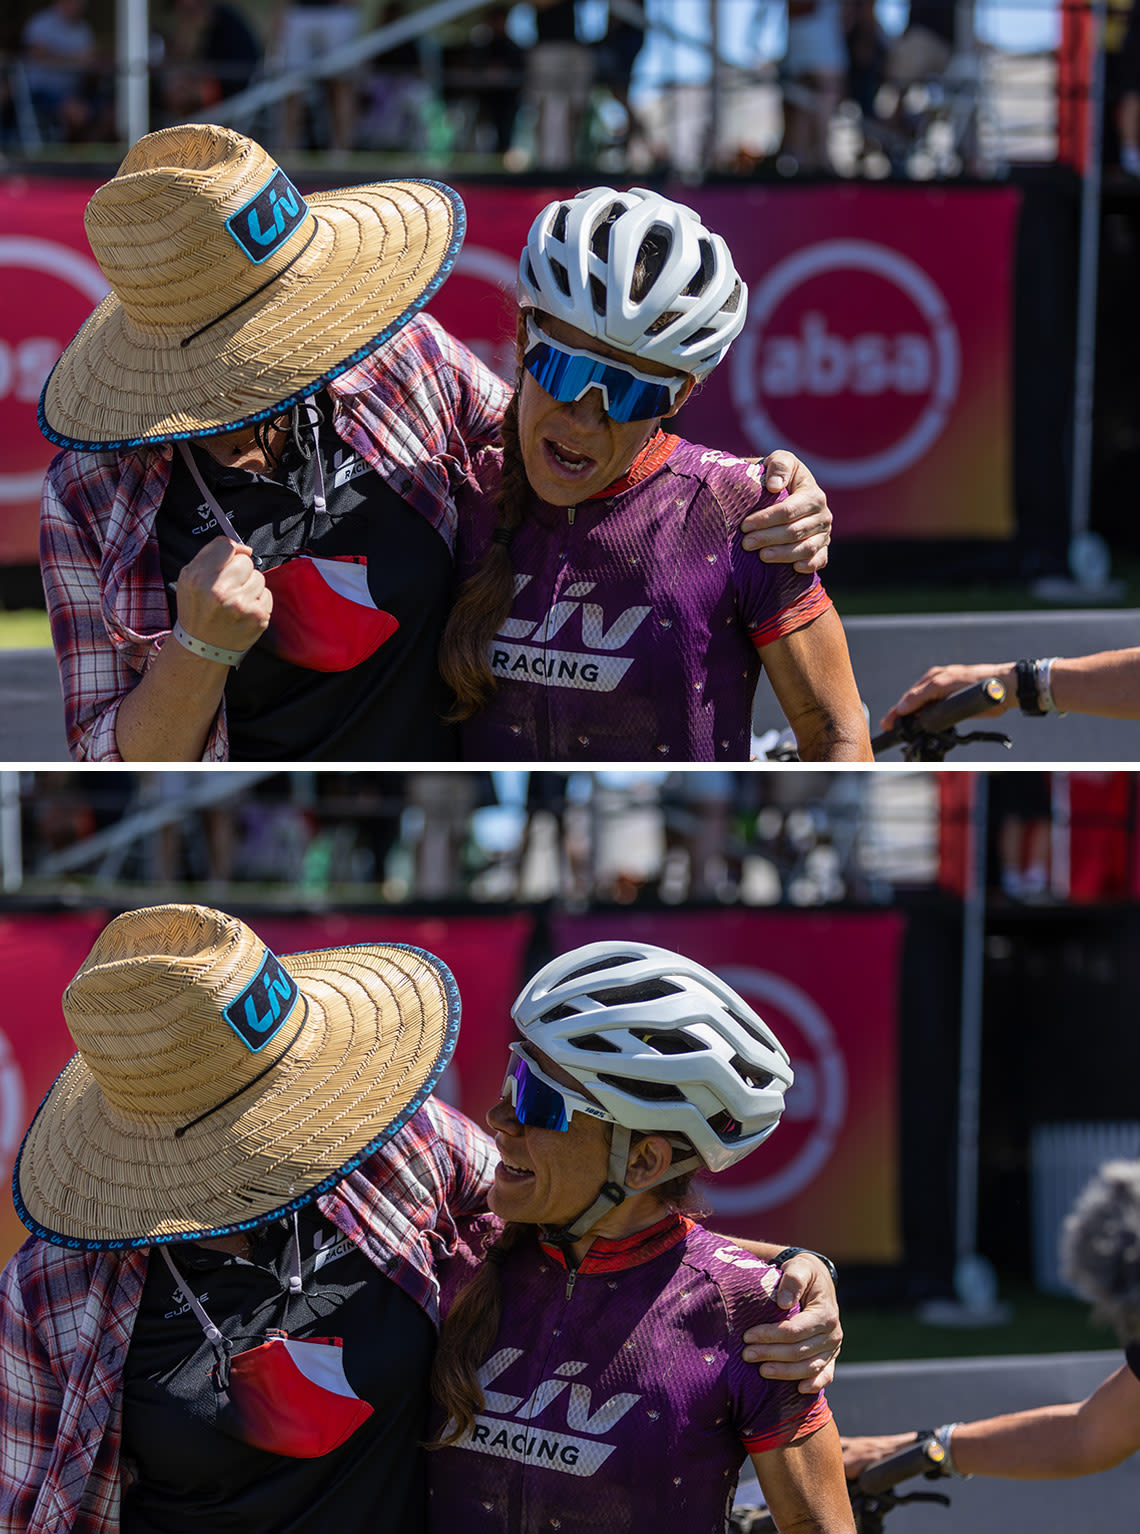 Crystal Anthony at Cape Epic